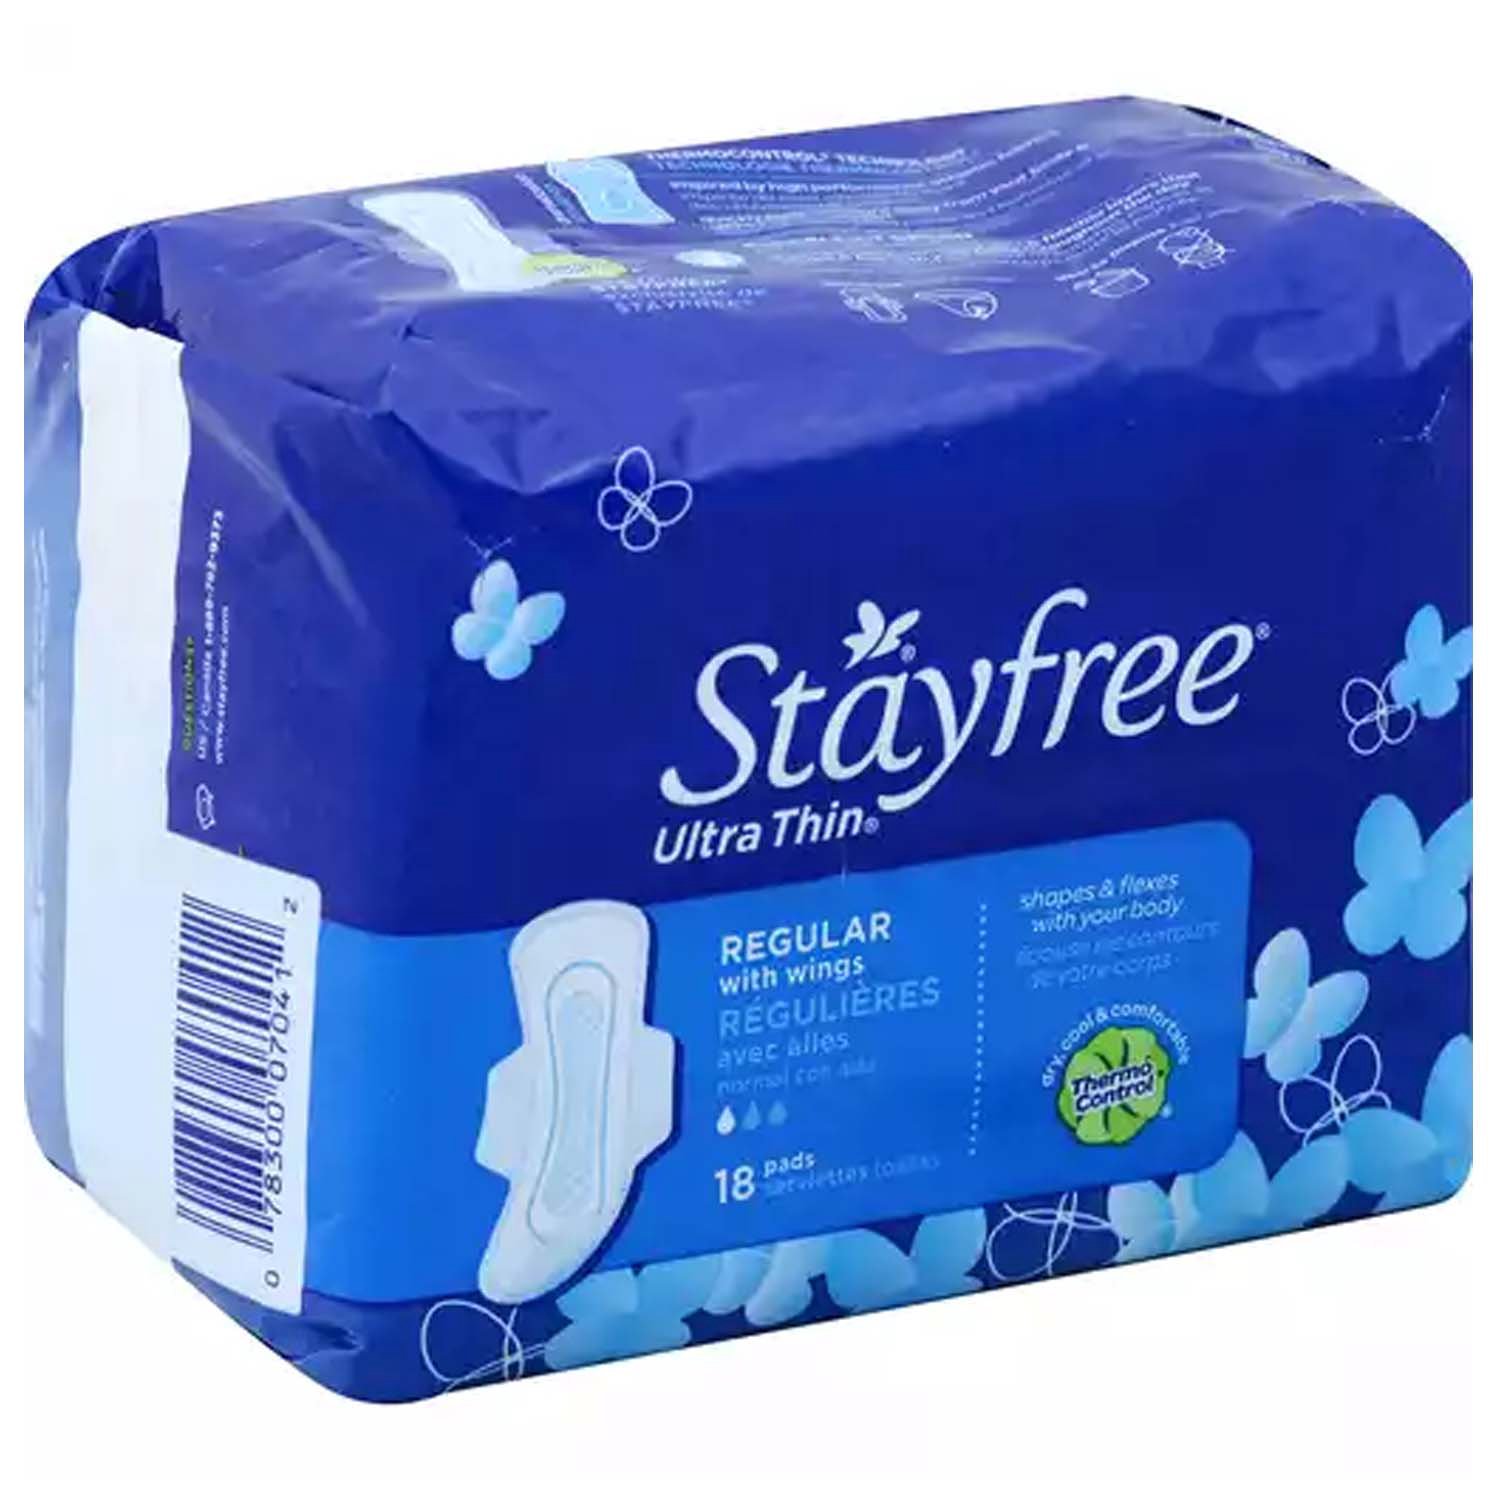 Stayfree Ultra Thin Pads, Regular with Wings - Foodland